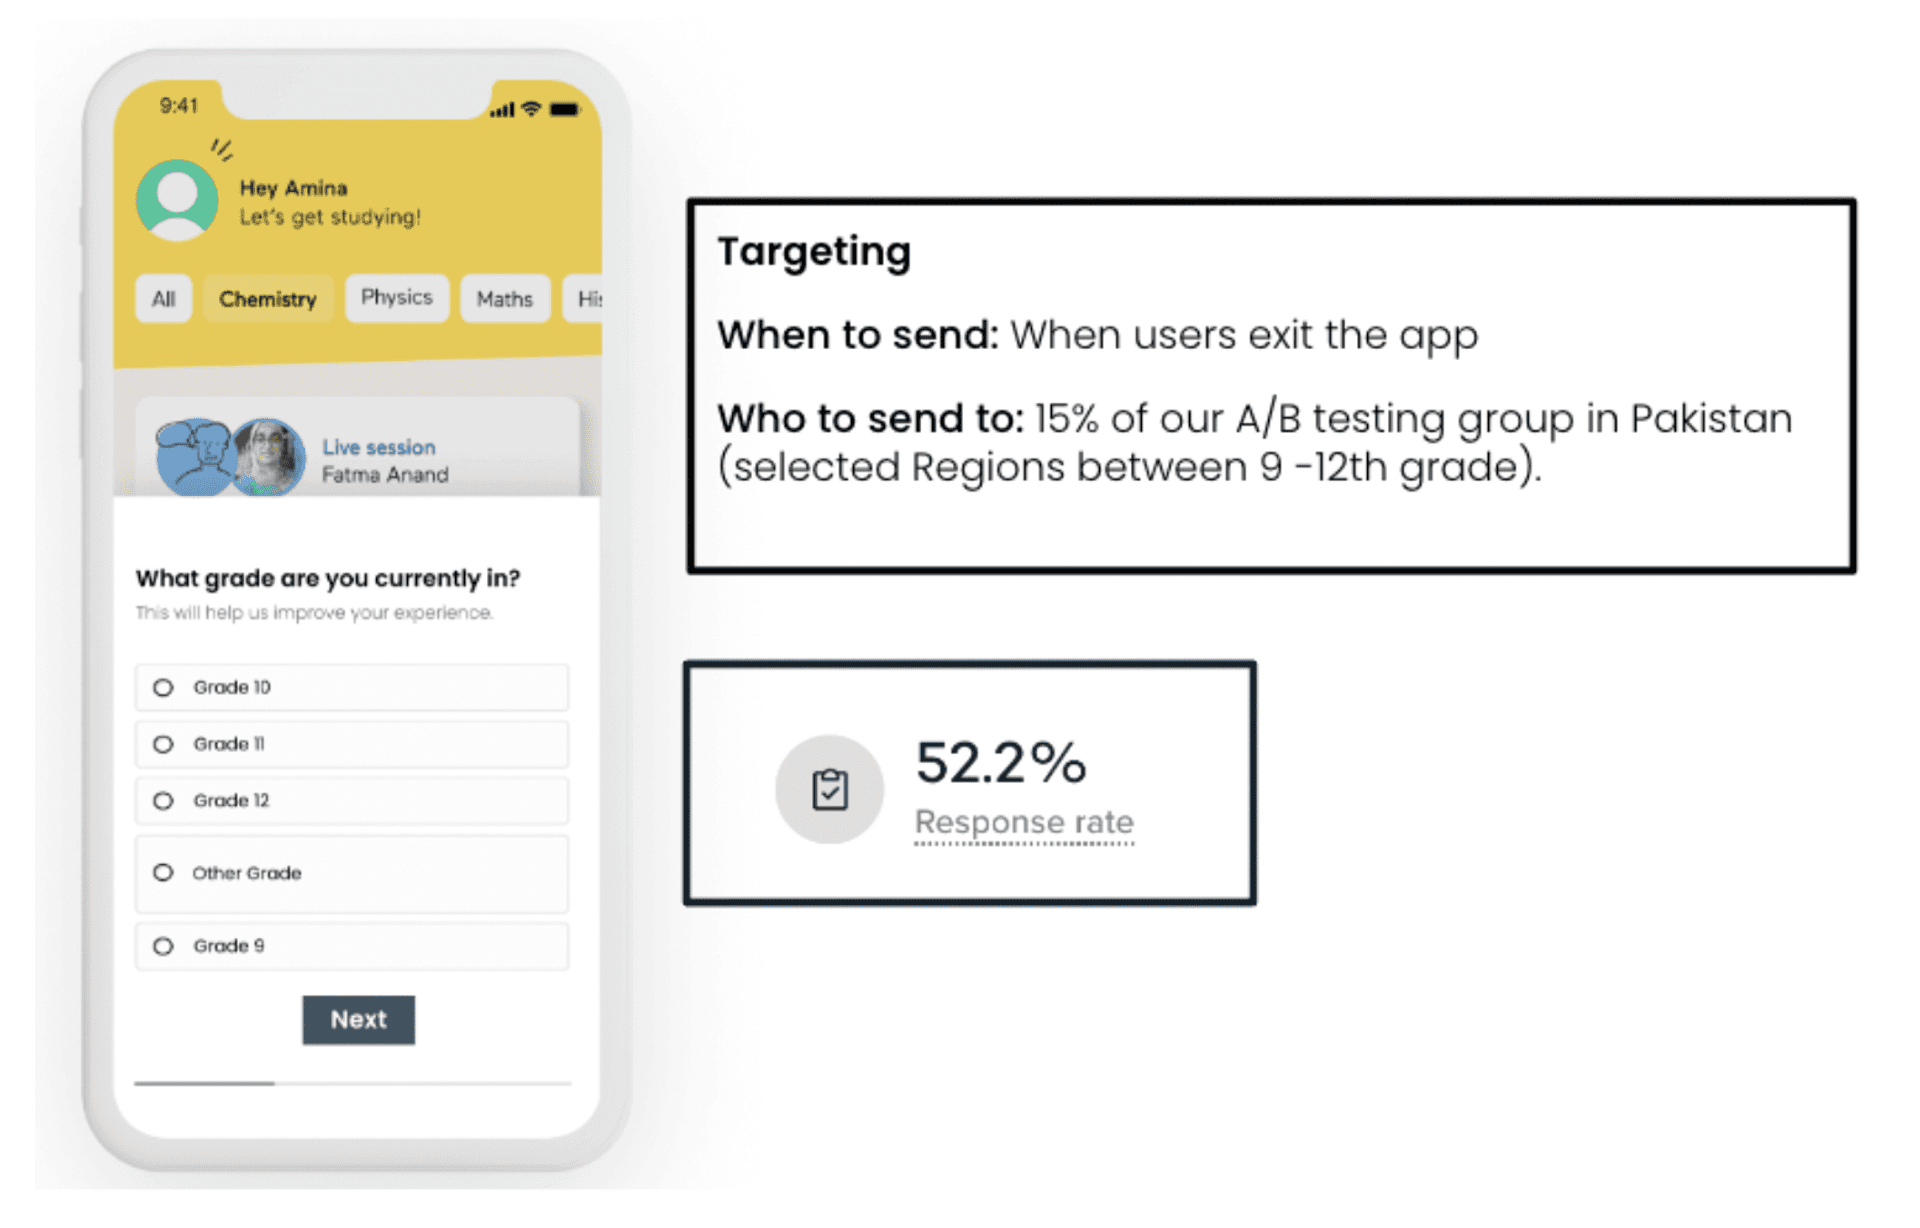 Image of in-app survey targeting specific users